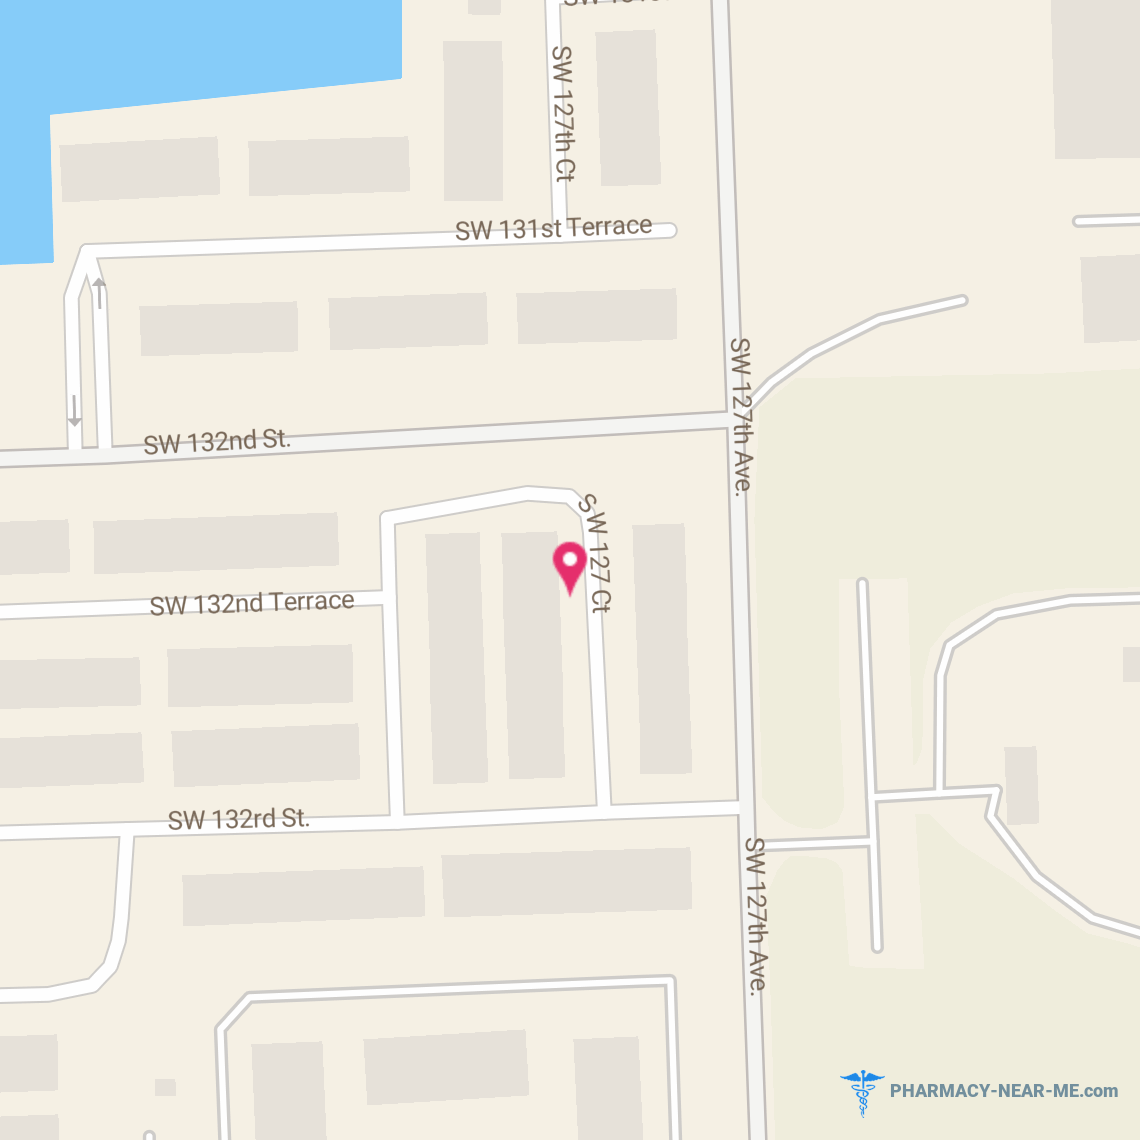 PUBLIX PHARMACY #0835 - Pharmacy Hours, Phone, Reviews & Information: 12100 SW 127th Ave, Three Lakes, Florida 33186, United States